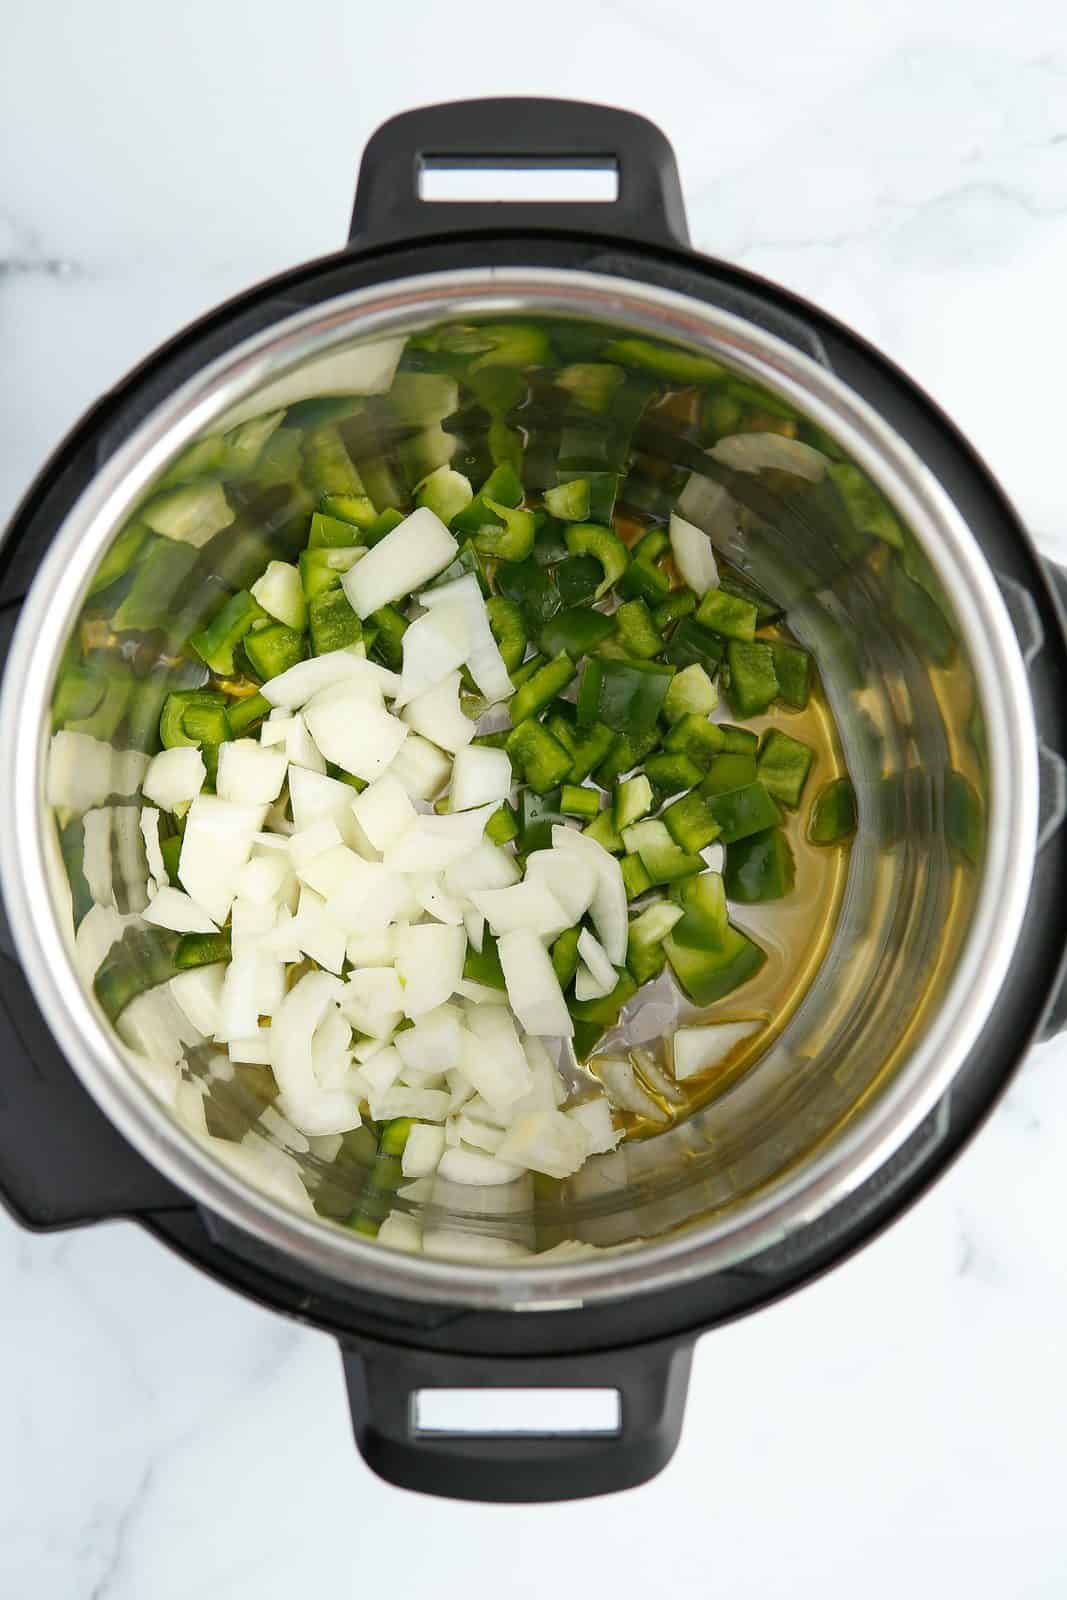 Oil, onions and green pepper in instant pot.